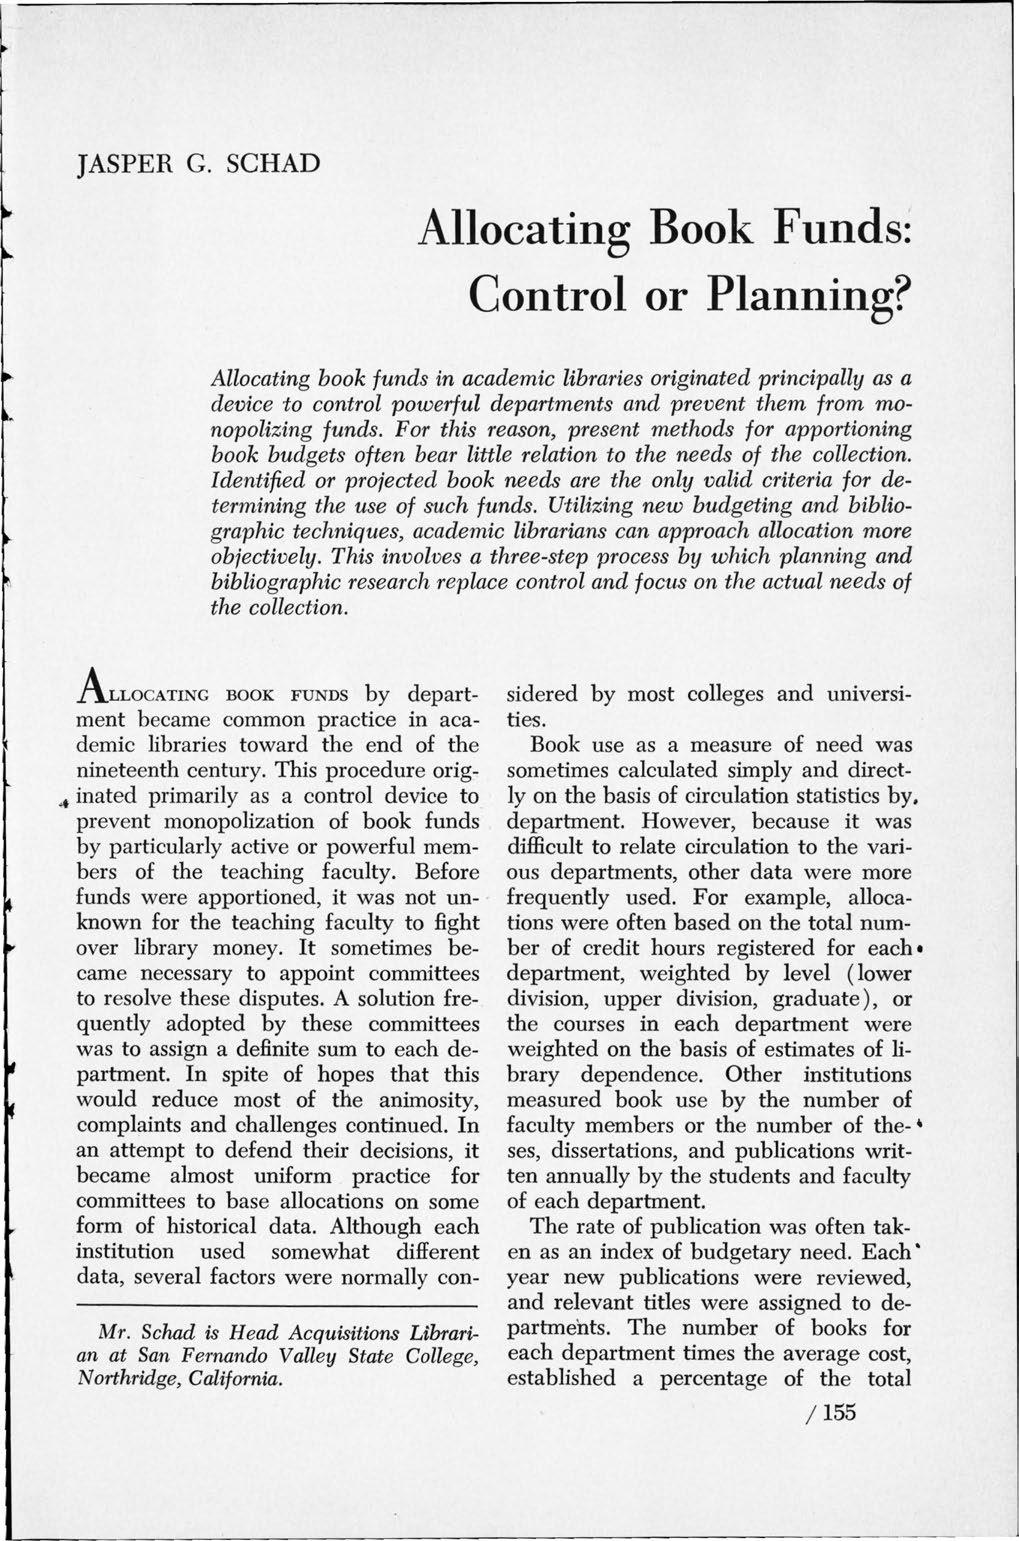 JASPER G. SCHAD Allocating Book Funds: Control or Planning?